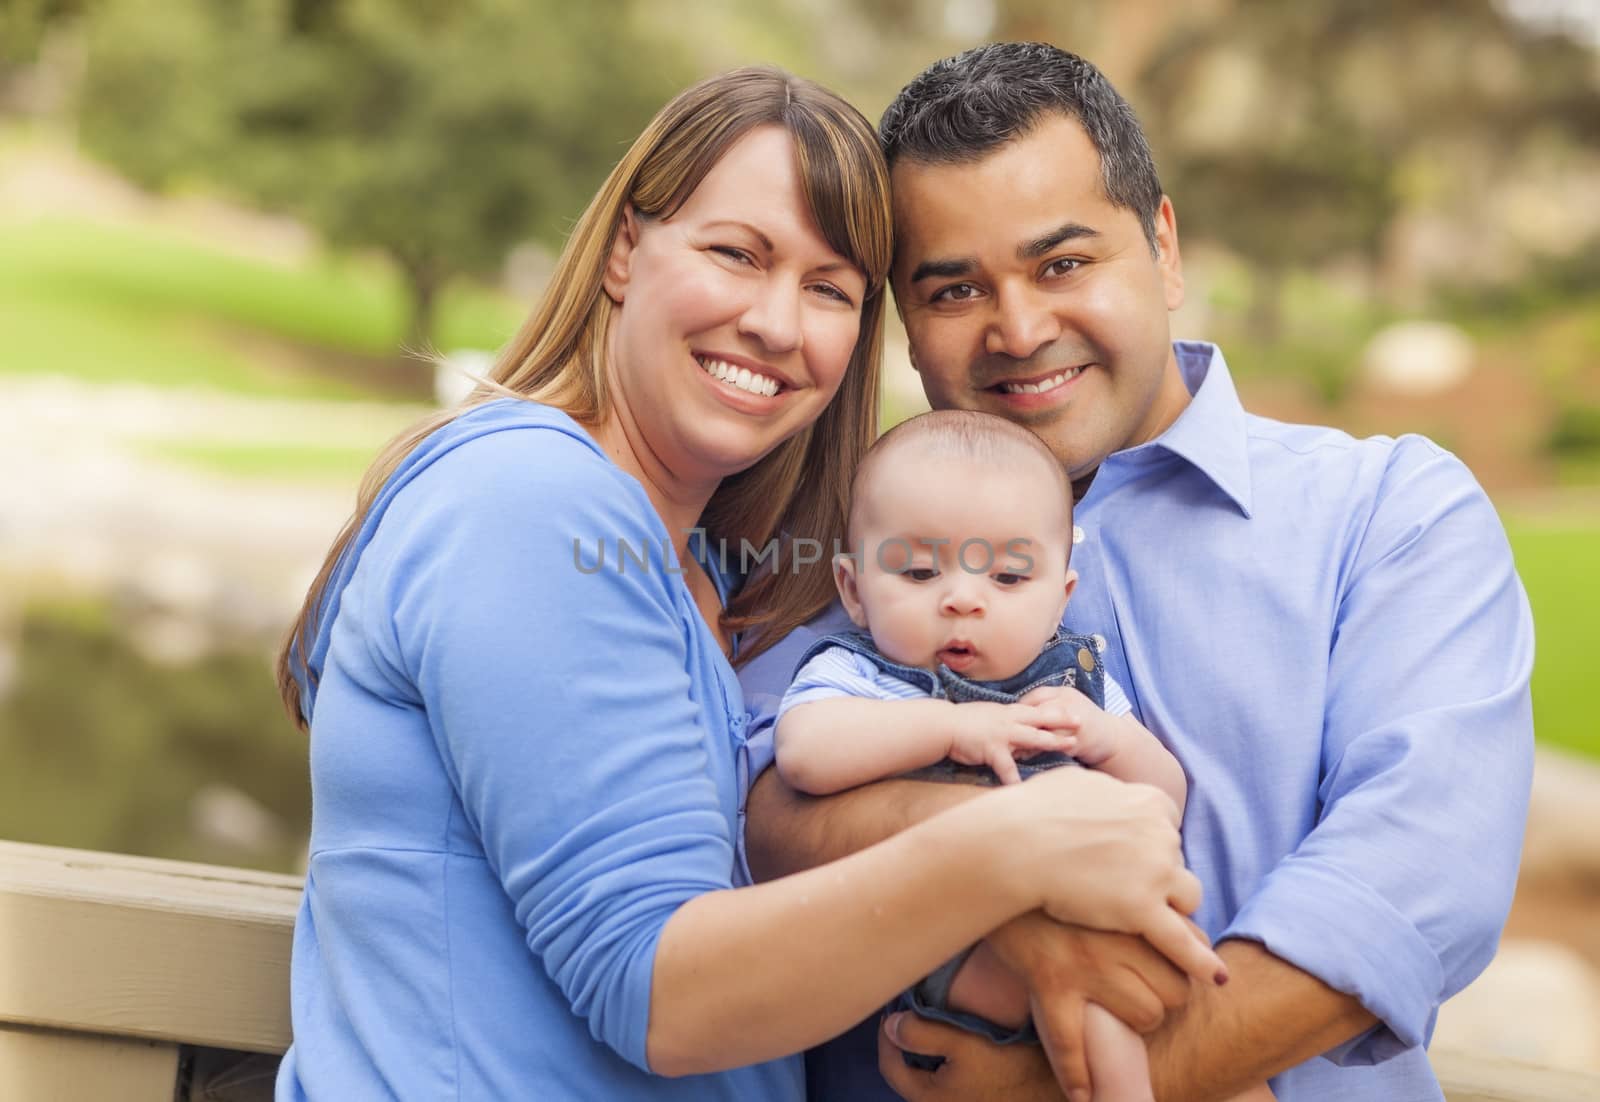 Attractive Happy Mixed Race Young Family Posing for A Portrait Outside in the Park.